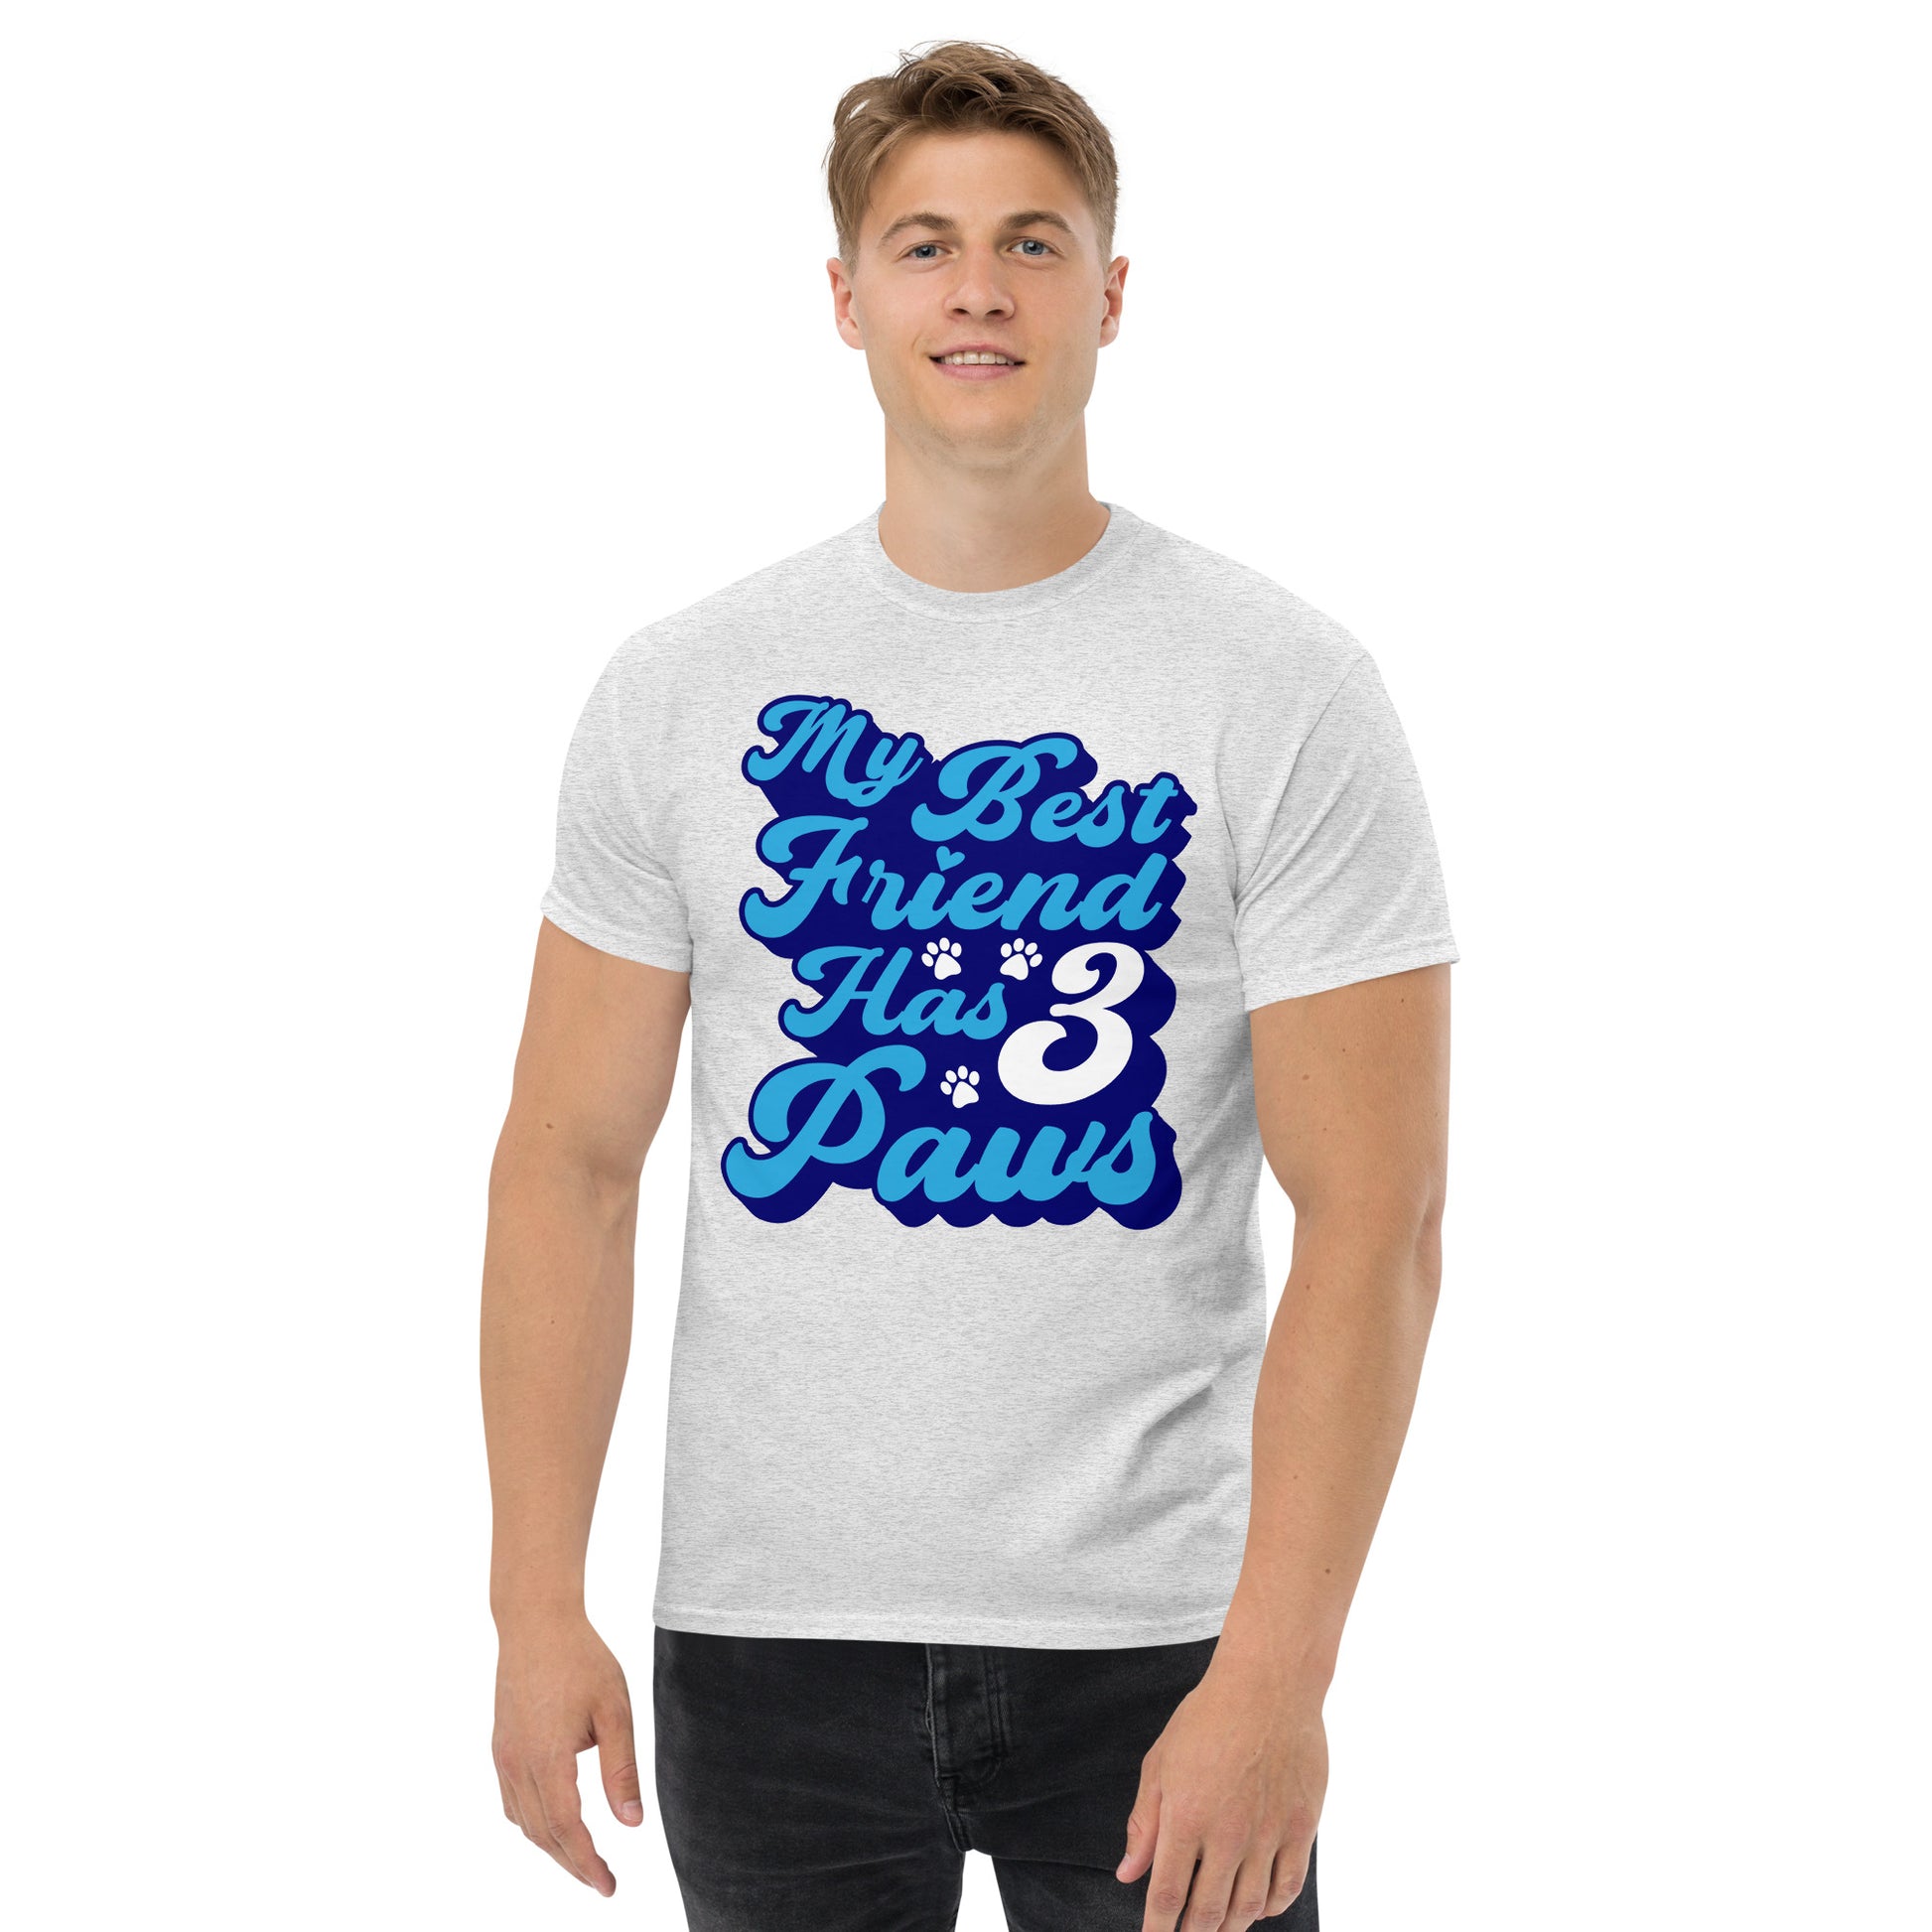 My best friend has 3 Paws men’s t-shirts by Dog Artistry ash color